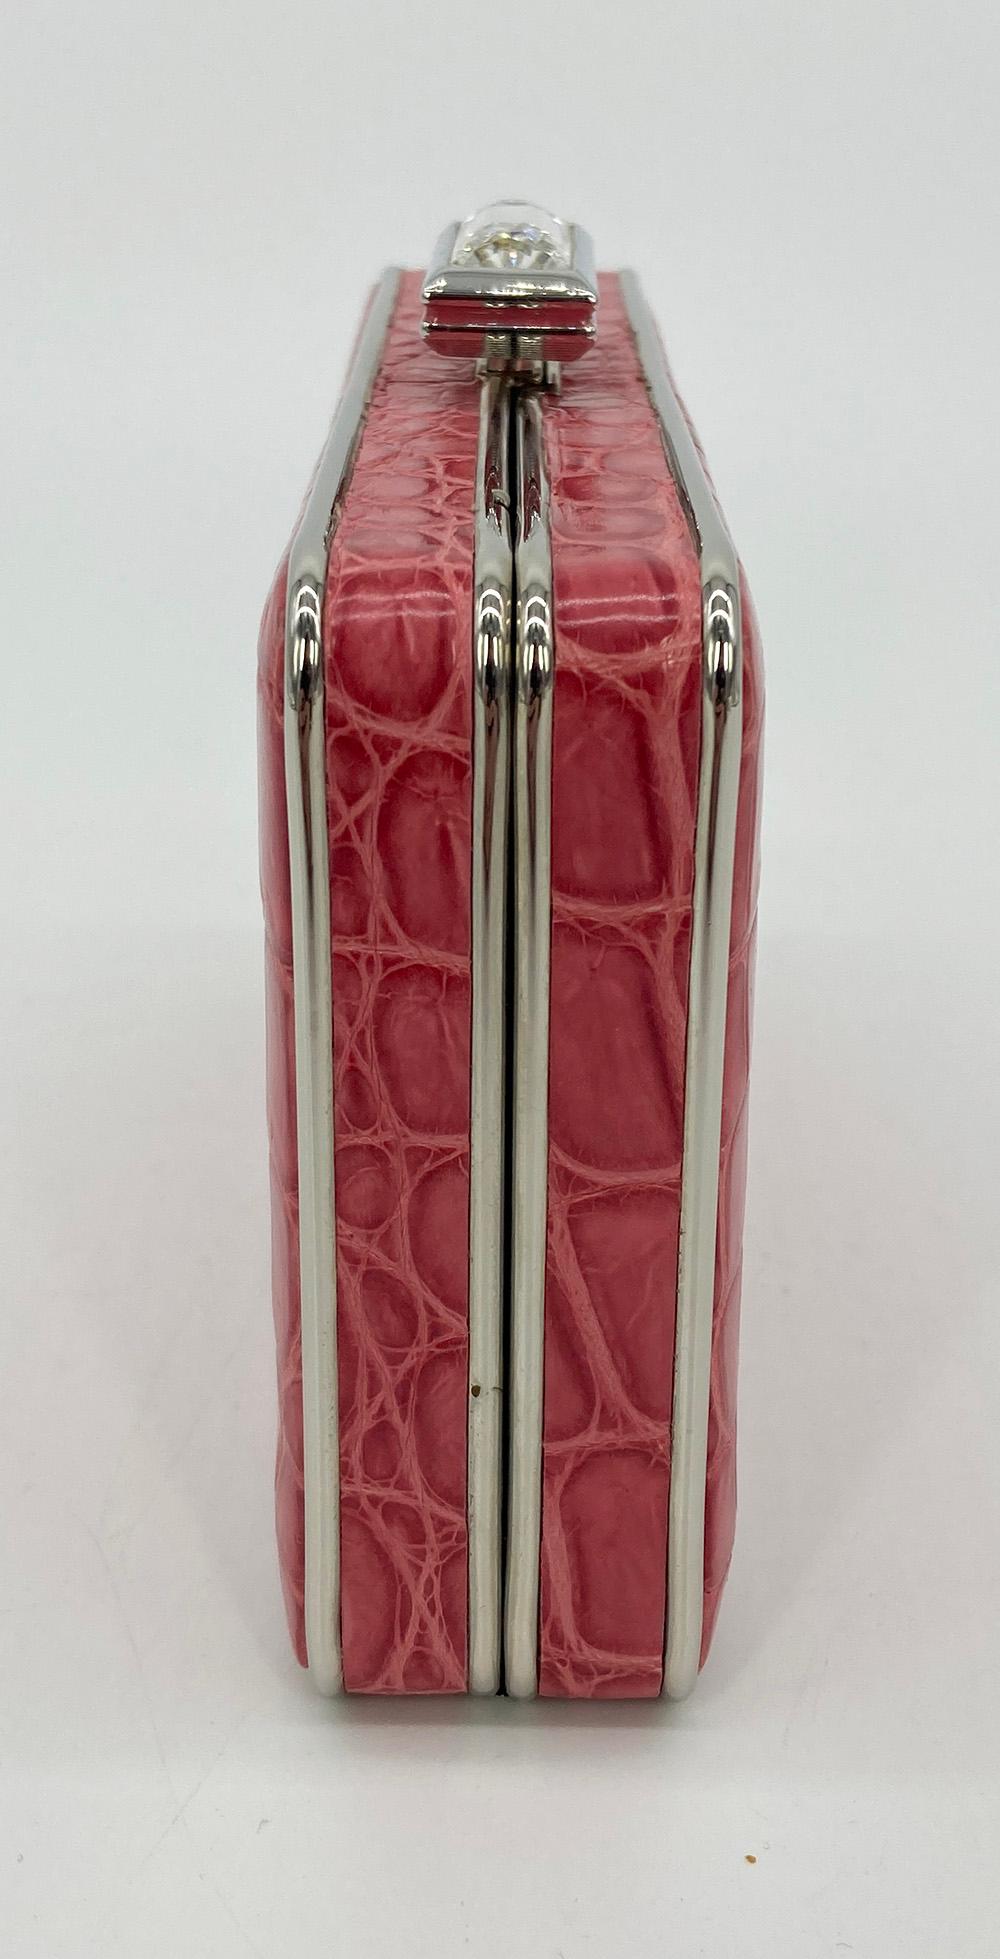 Judith Leiber Pink Alligator Box Clutch in excellent condition. Pink alligator trimmed with silver hardware and top crystal button closure. pink satin interior with attached silver chain shoulder strap. no stains smells or scuffs. clean corners